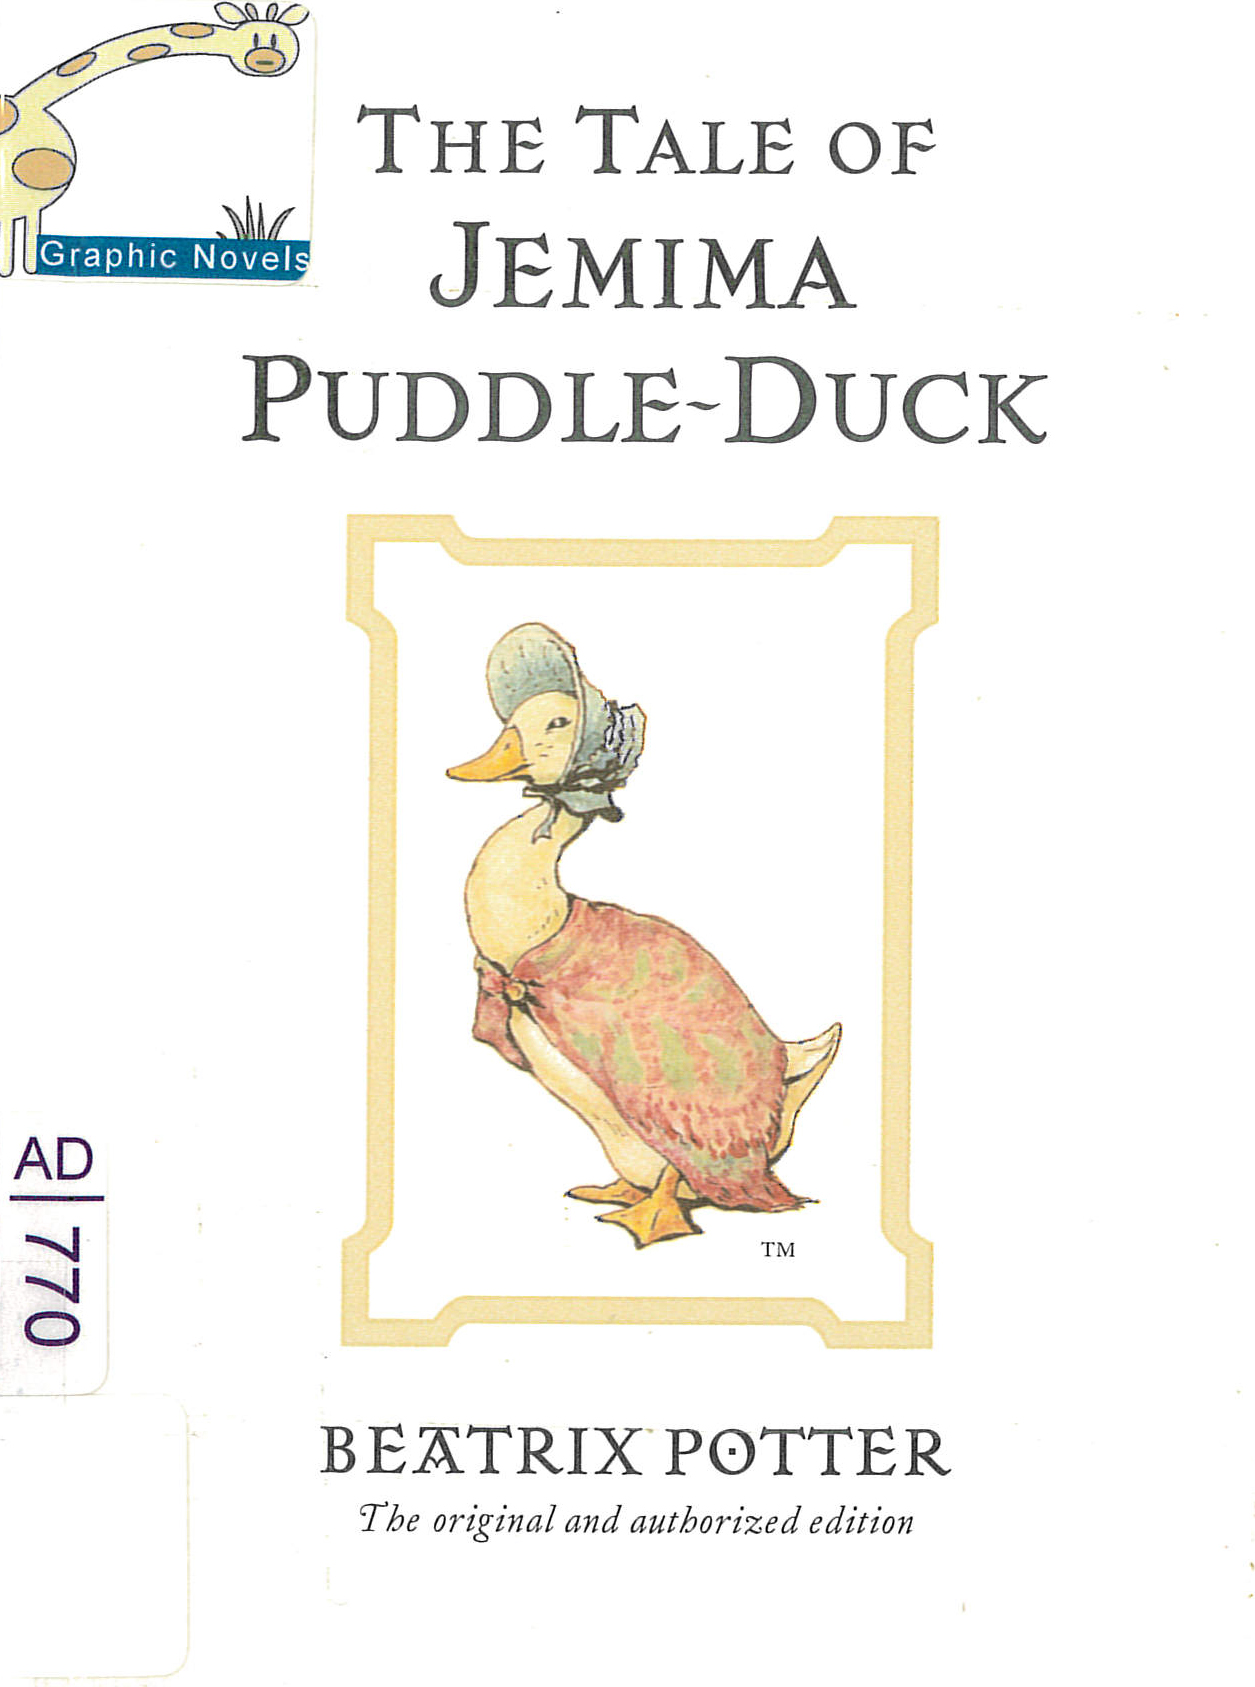 The tale of Jemima Puddle-Duck